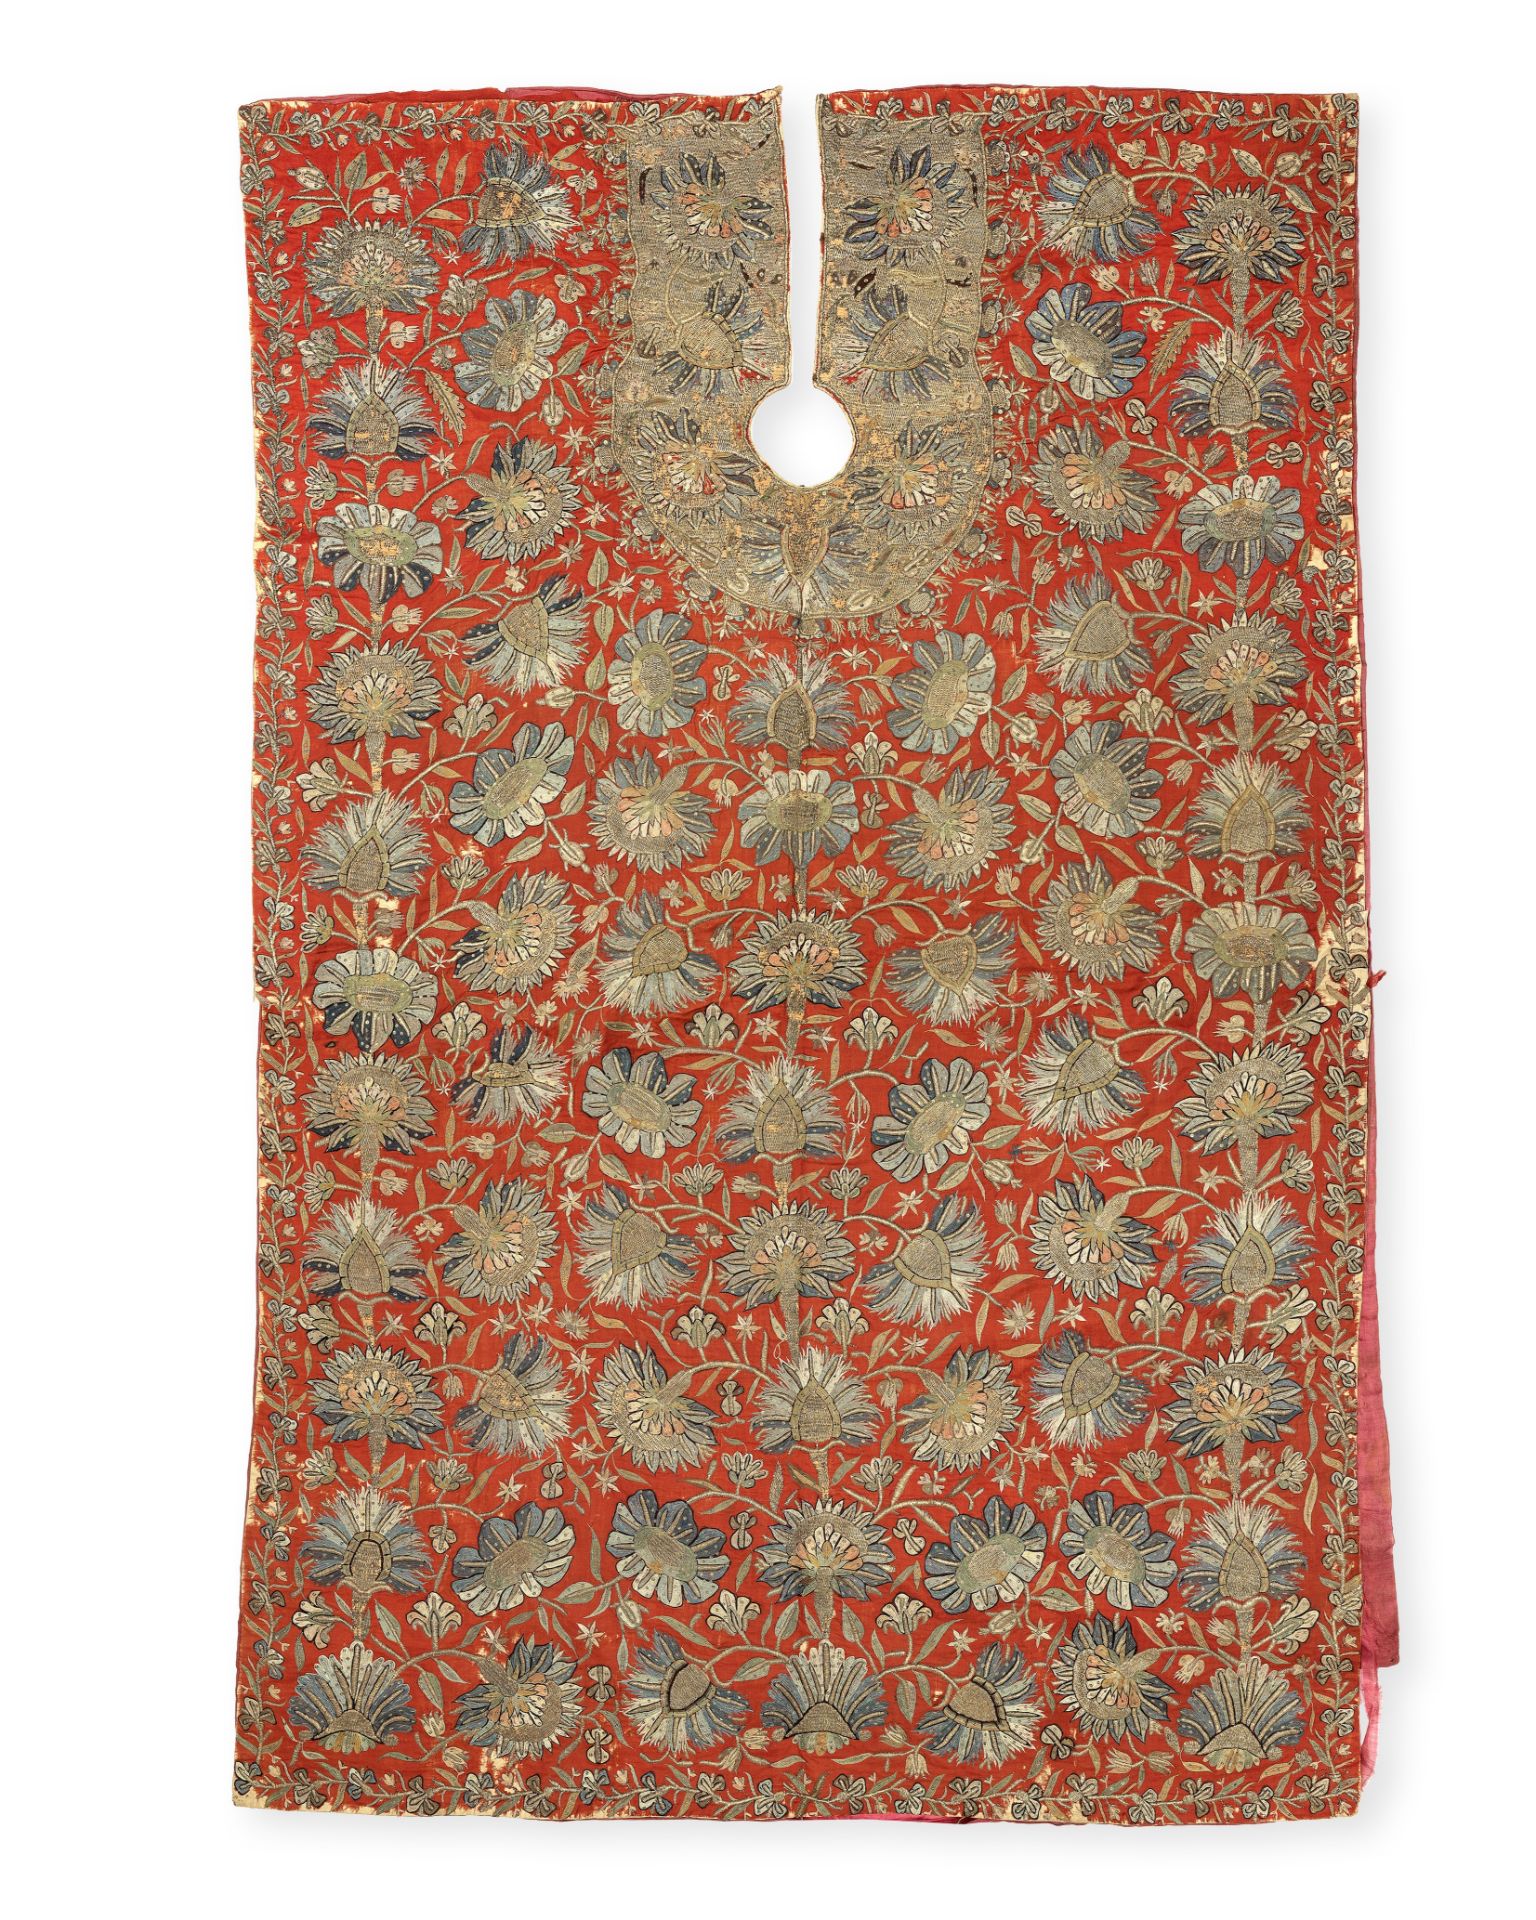 An Ottoman silk and metal thread-embroidered wool barber's apron Turkey, second half of the 18th ...